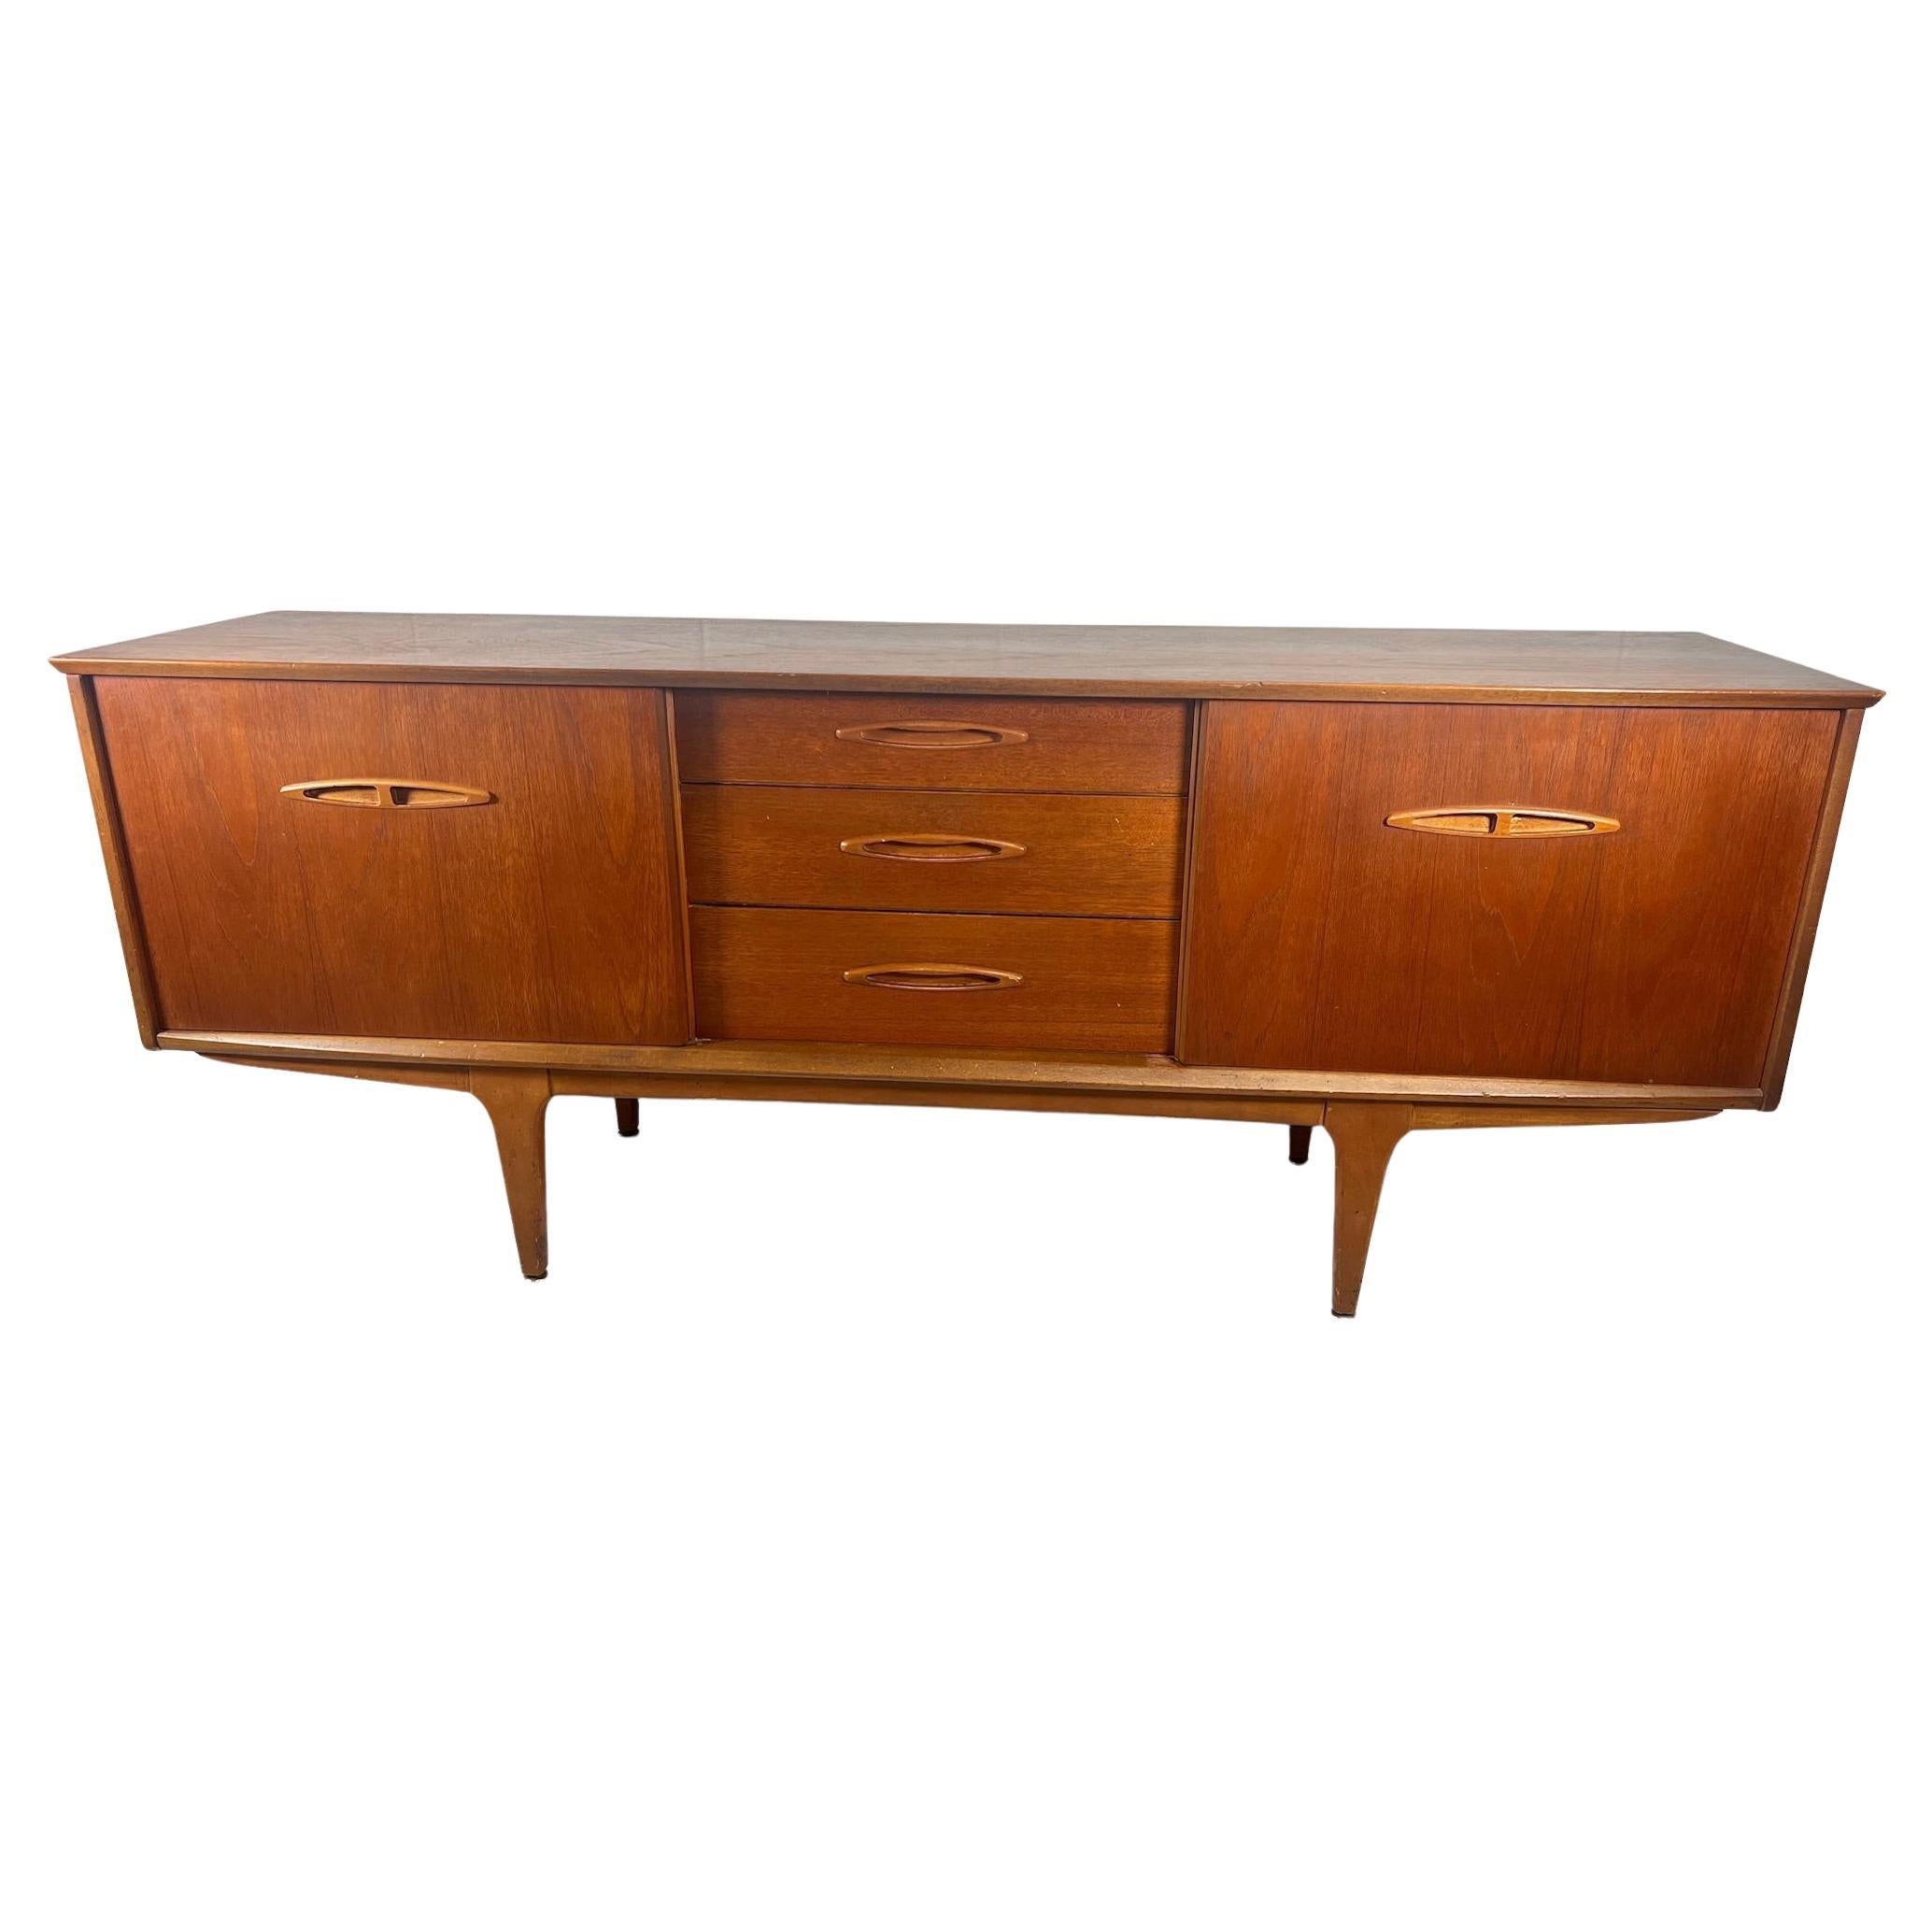 Mid Century Modern Teak Credenza Sliding Doors By Jentique Made in England For Sale